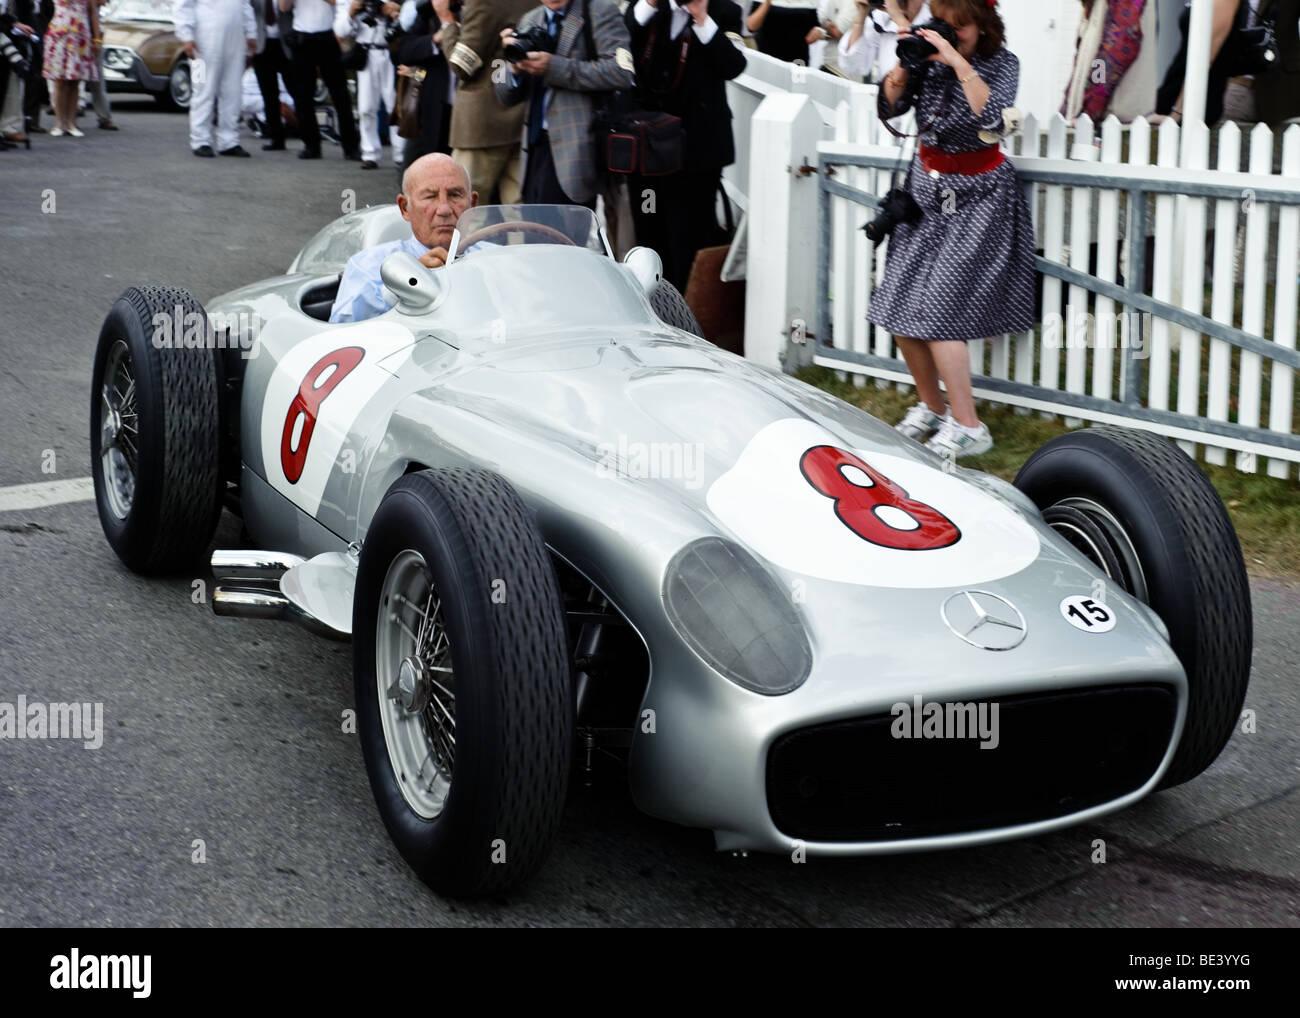 Sir Stirling Moss celebrates his 80th birthday driving a Mercedes Benz racing car on to the track at the Goodwood Revival Stock Photo